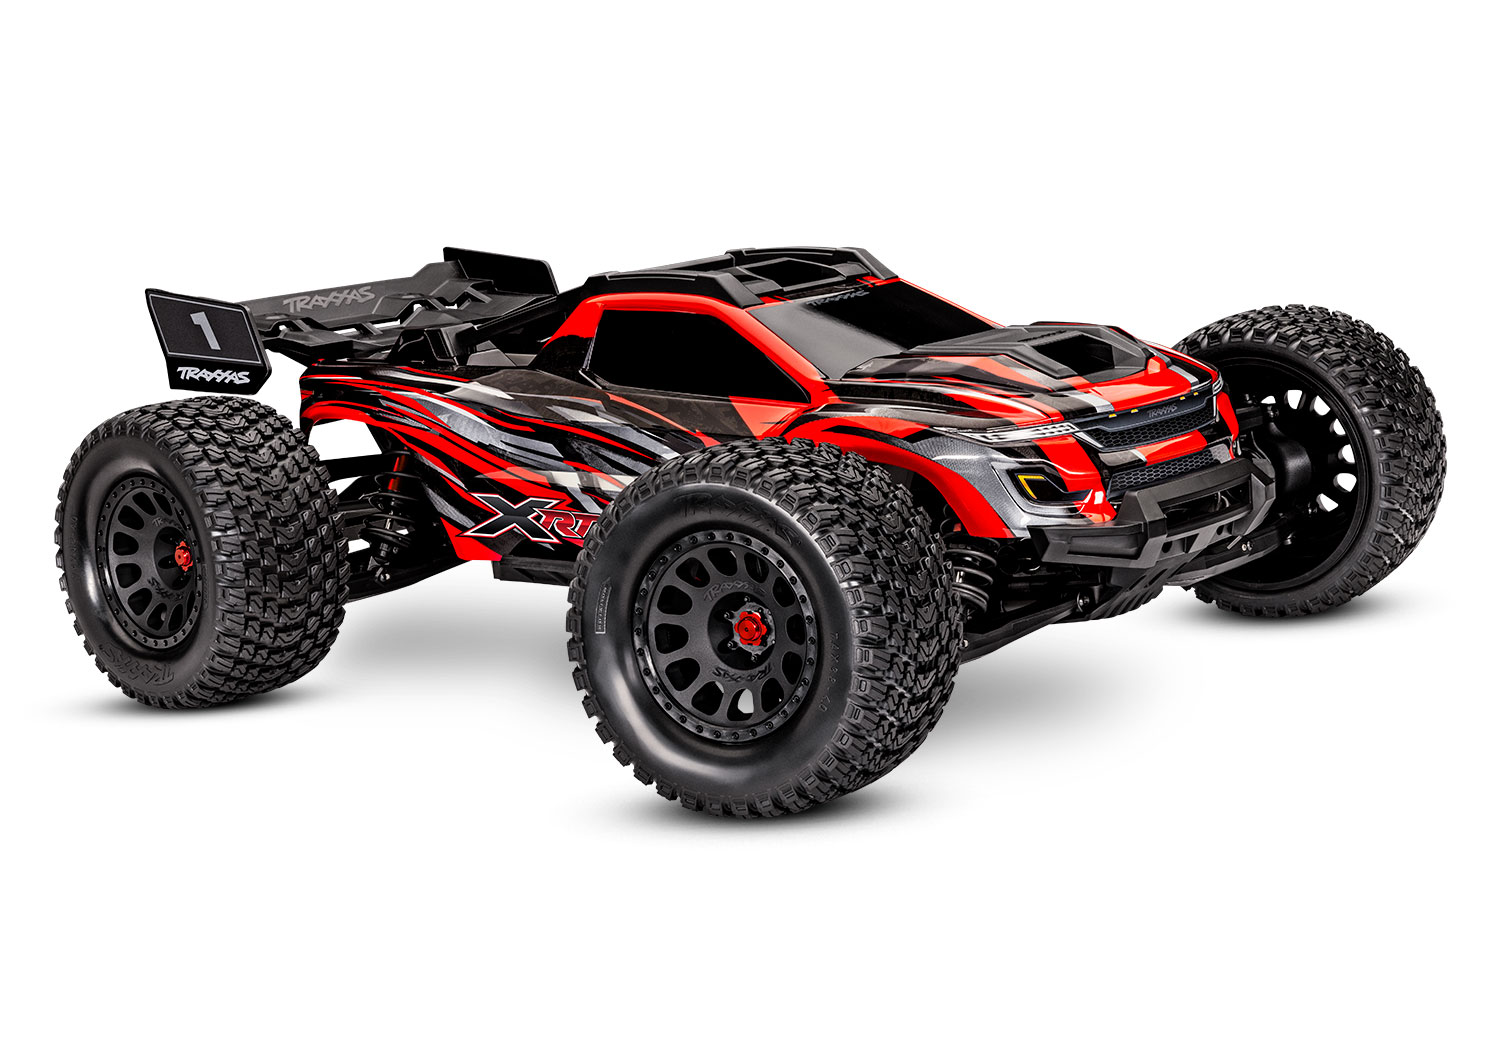 Traxxas XRT Brushless Electric Race Truck with TQi Traxxas Link 2.4GHz Radio System & Traxxas Stability Management (TSM)